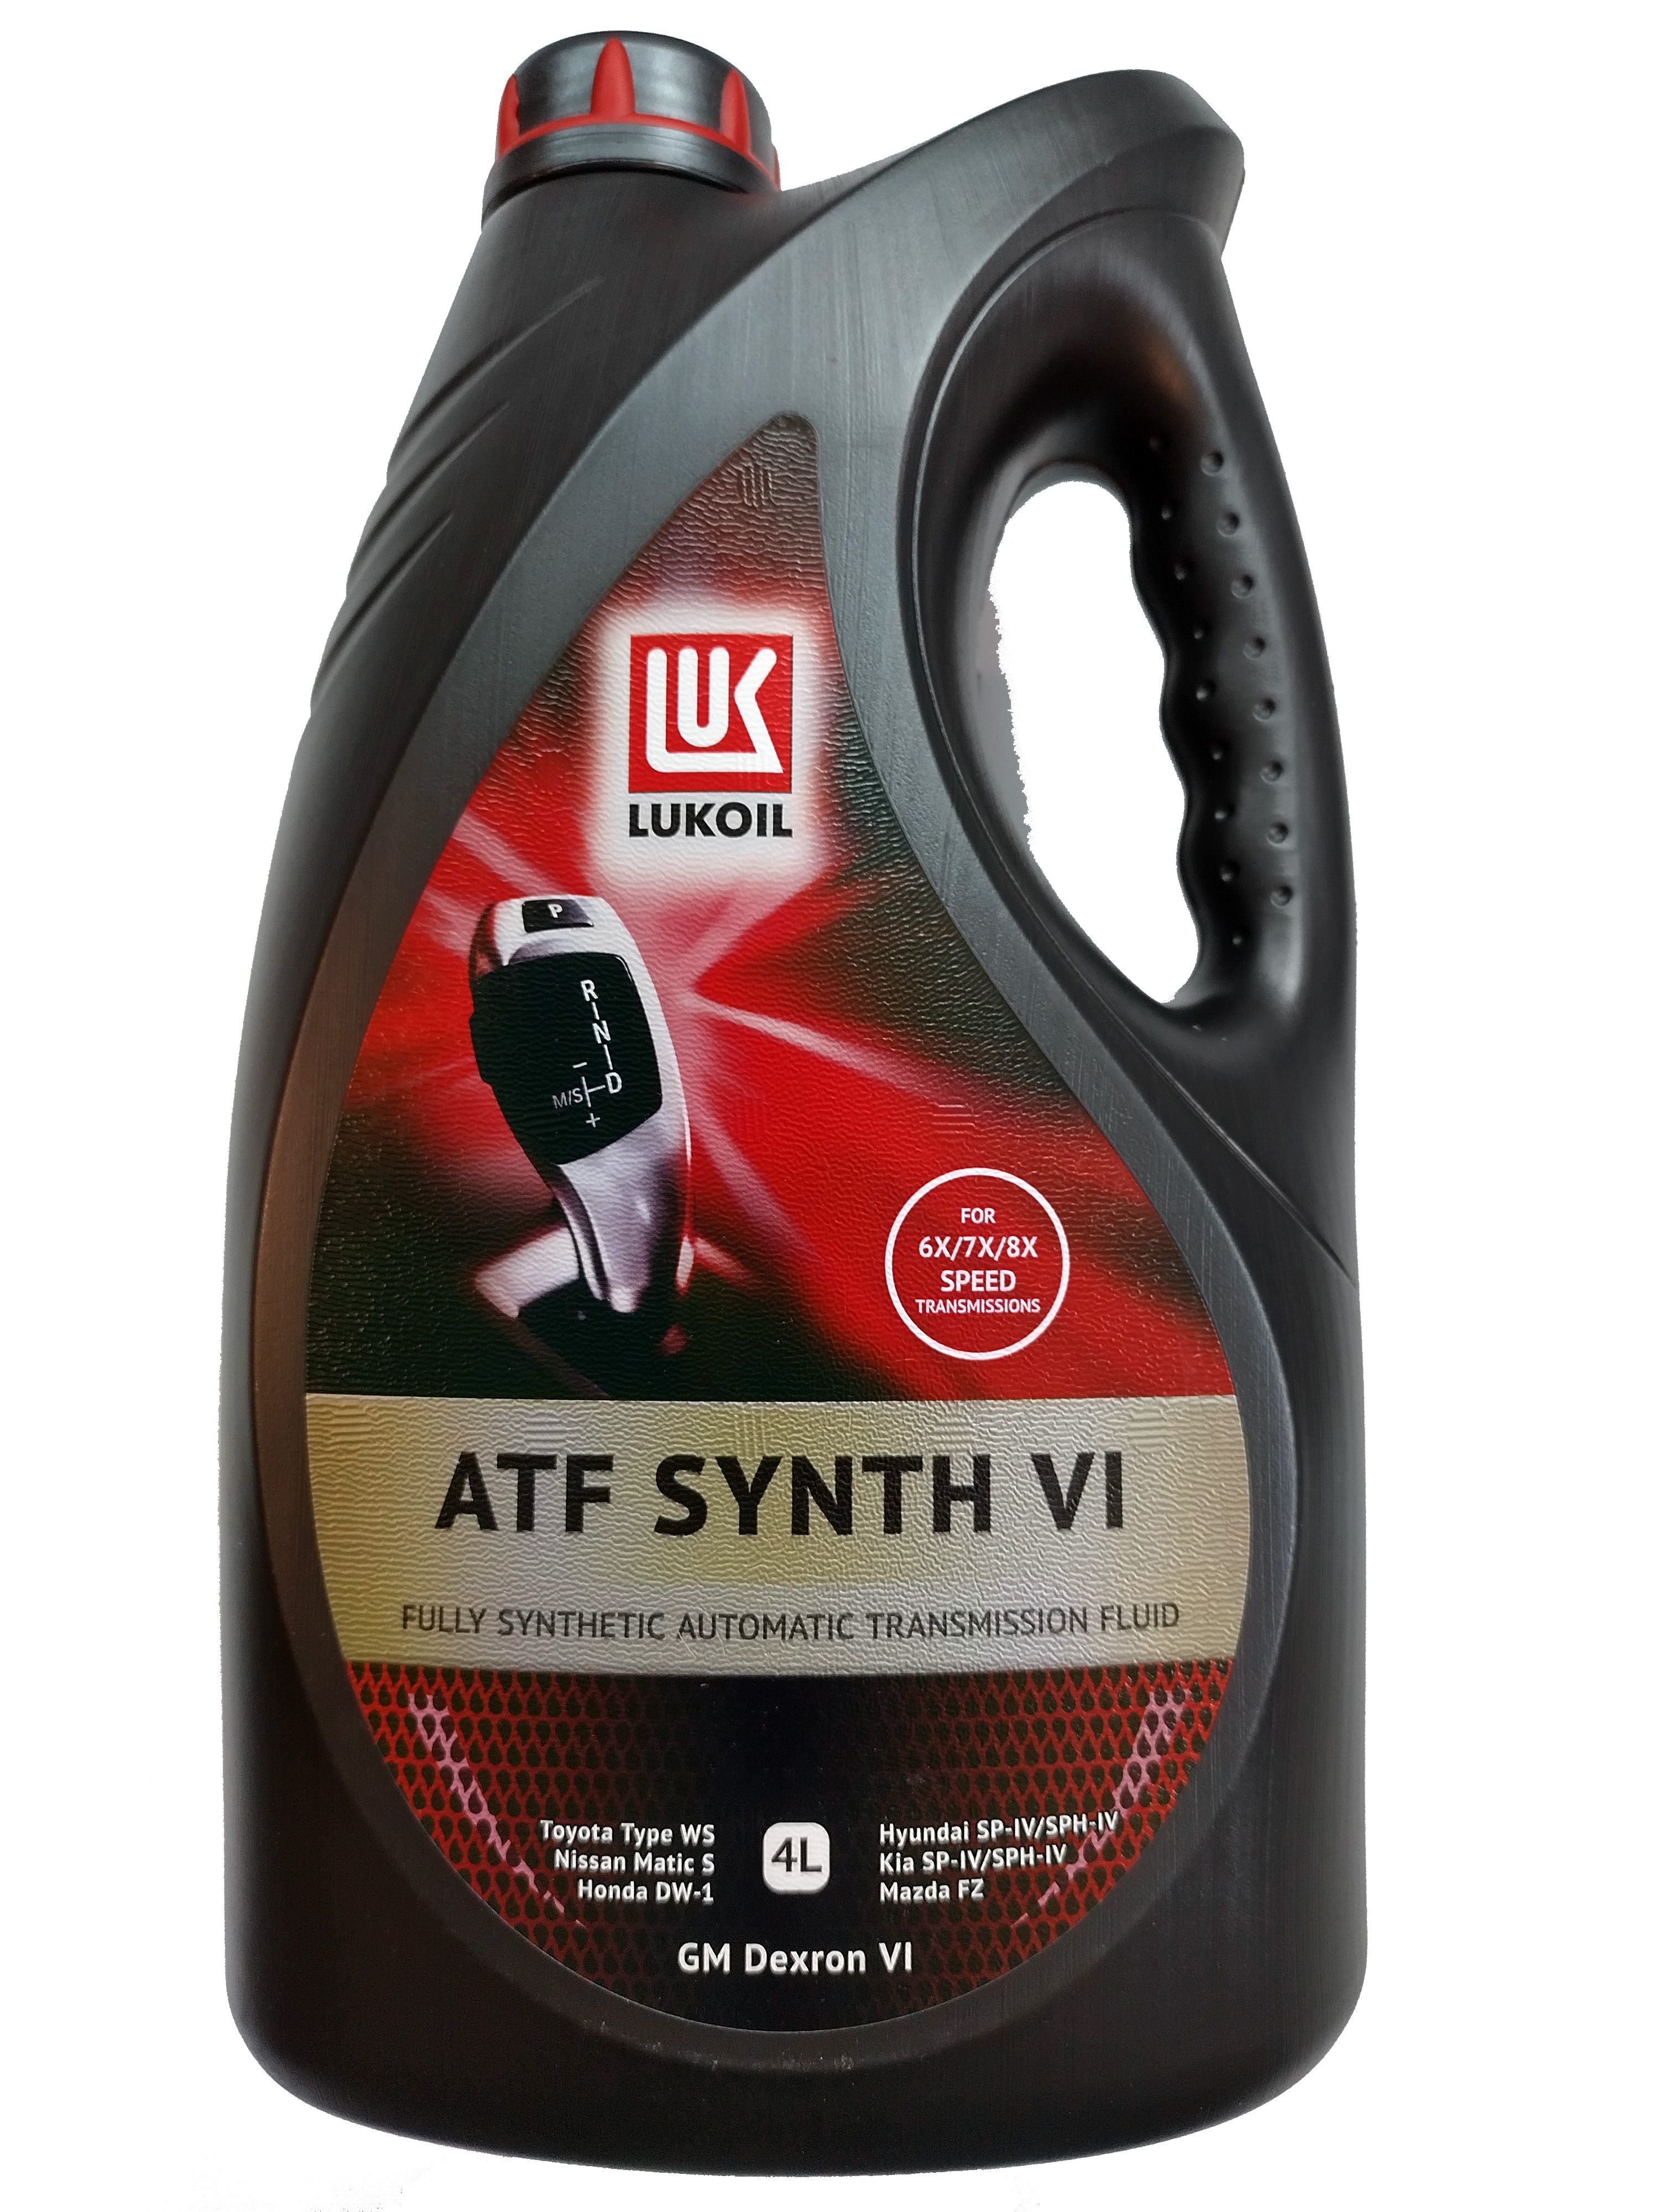 Лукойл atf vi. Лукойл ATF Synth vi. Масло Лукойл АТФ декстрон 6 4л. Lukoil ATF Synth 6 216. Лукойл ATF Synth Multi 4л.